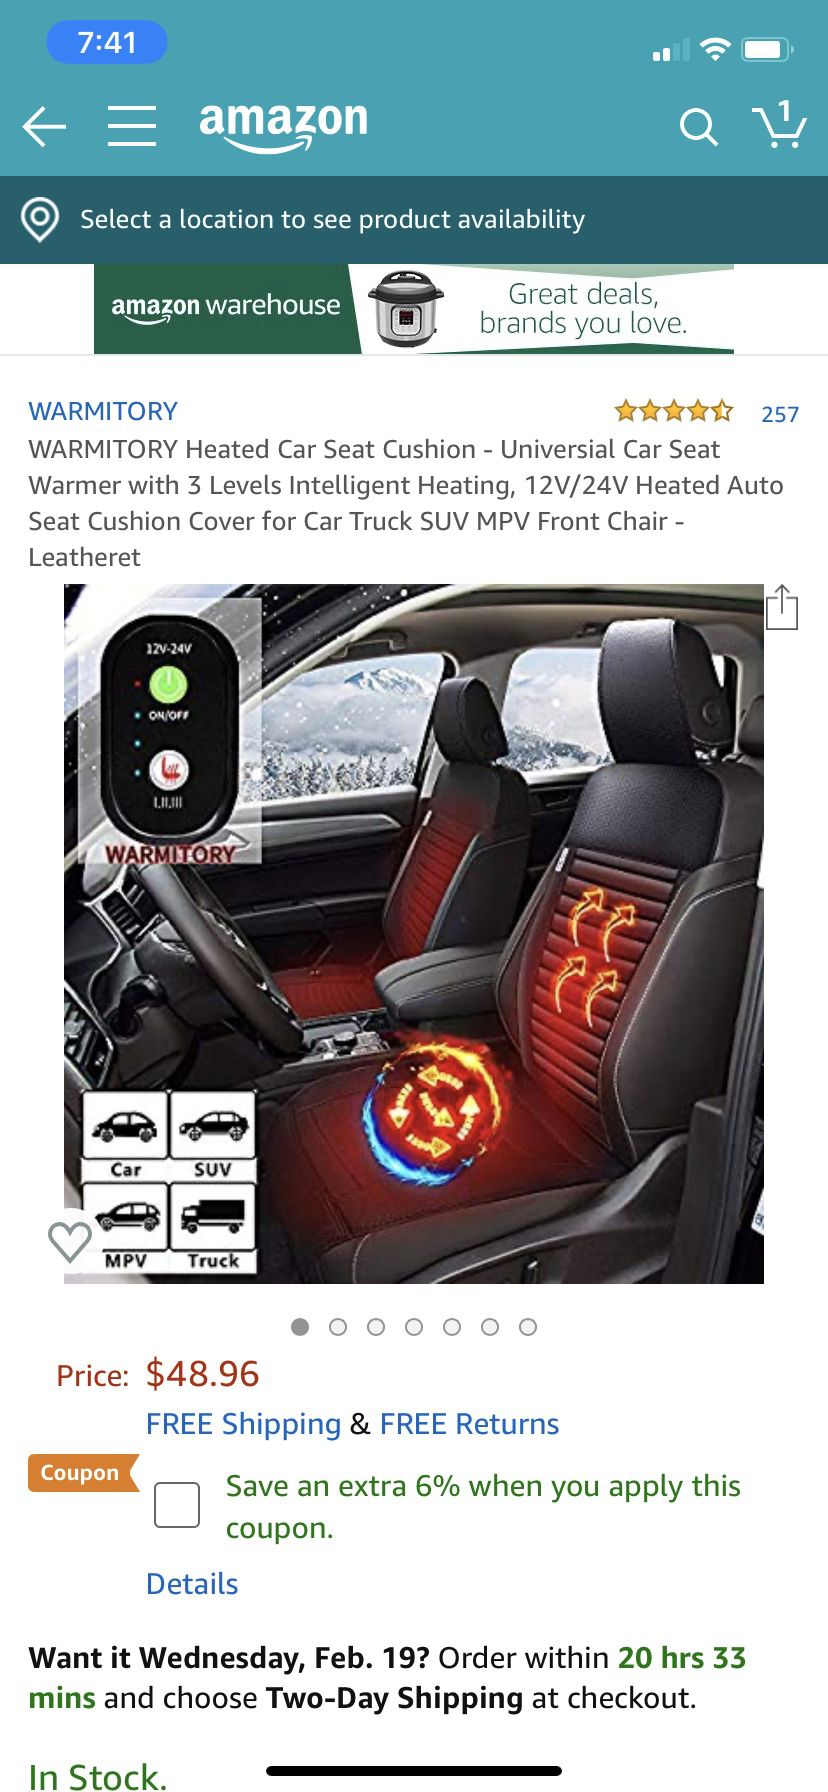 Universial Car Seat Warmer with 3 Levels Intelligent Heating, 12V/24V Heated Auto Seat Cushion Cover for Car Truck SUV MPV Front Chair - Leatheret